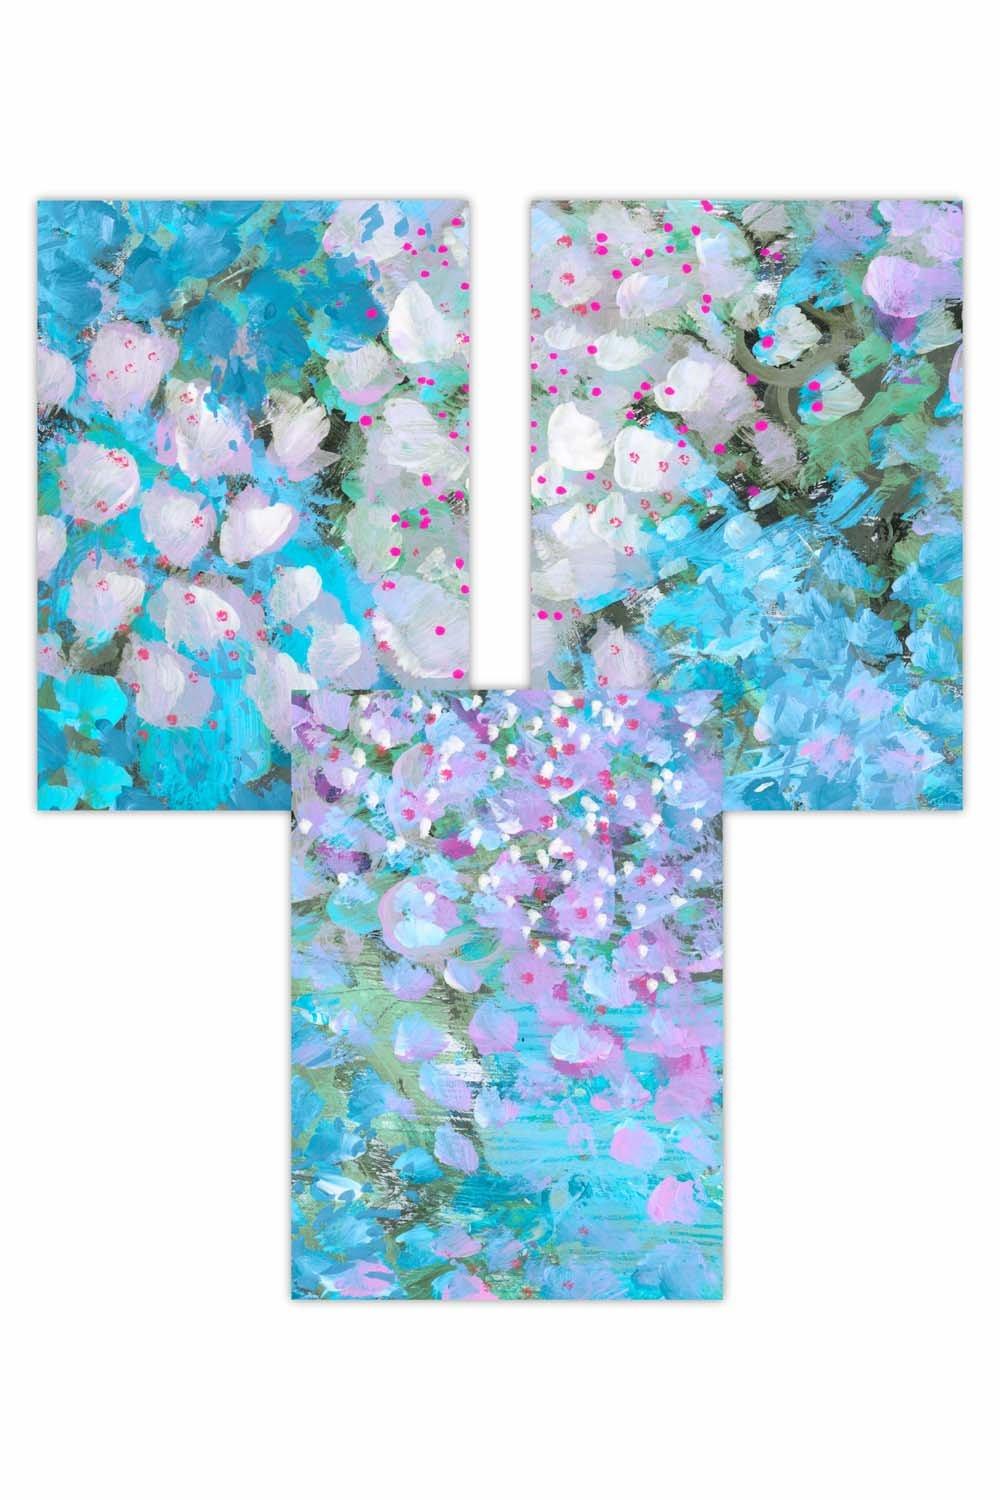 Set of 3 Abstract Cottage Garden Flowers in Blue Art Posters